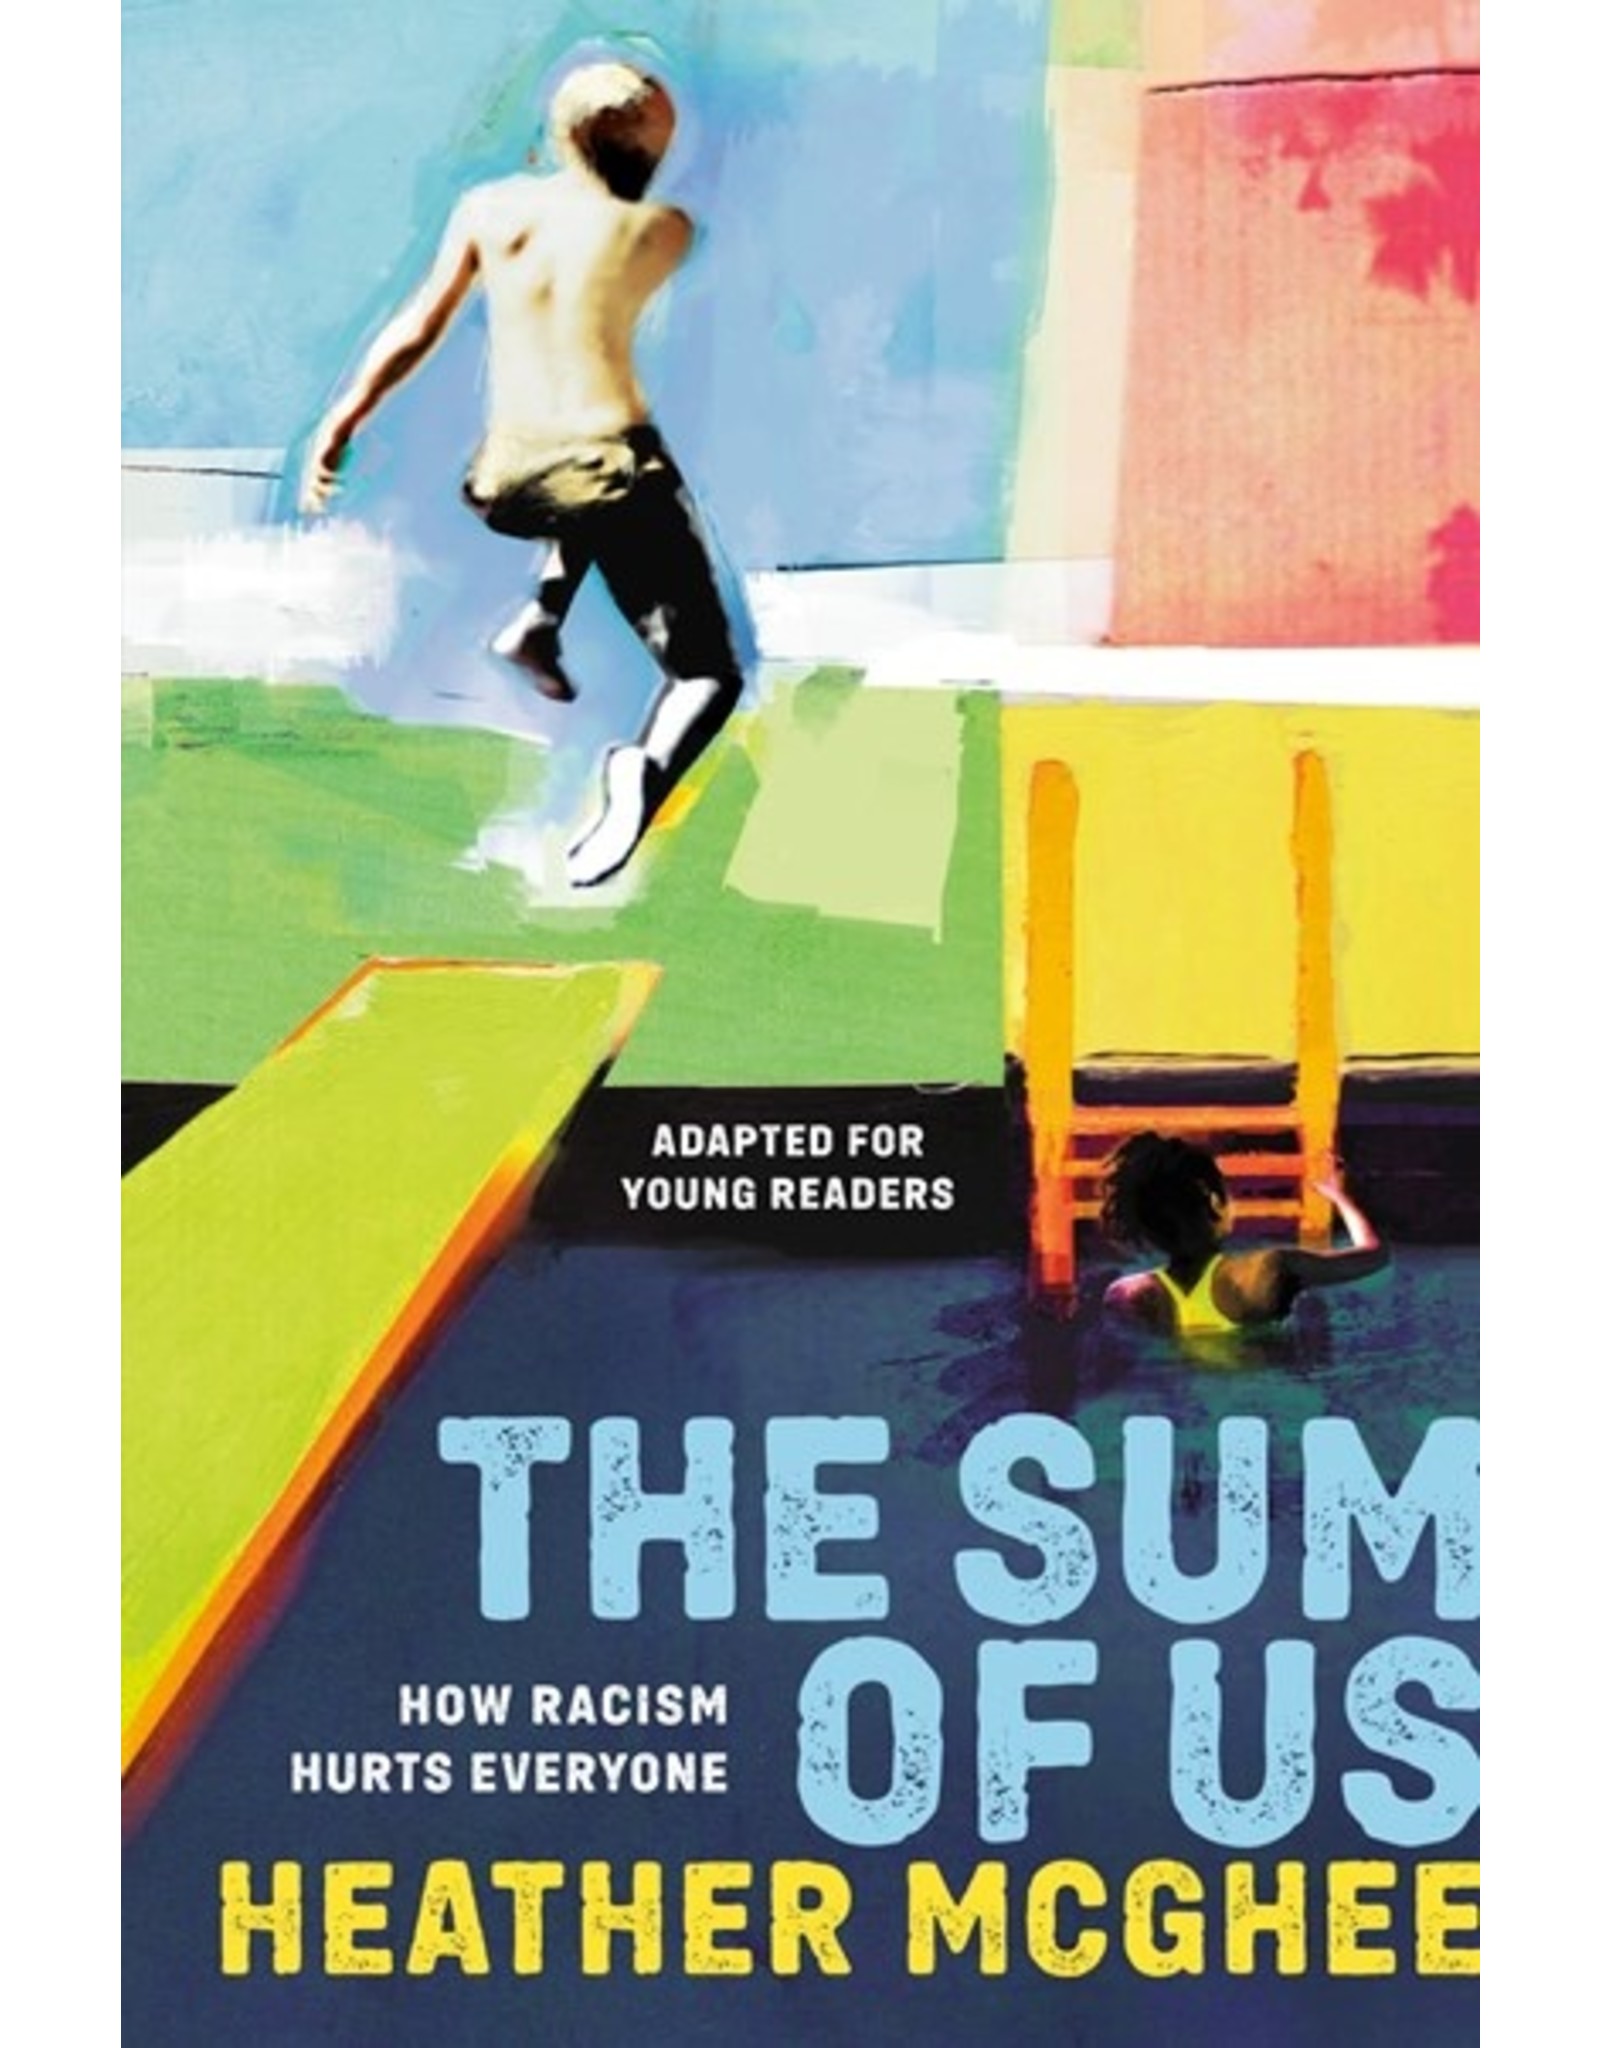 Books The Sum of Us: How Racism Hurts Everyone by Heather McGhee Adapted for Young Readers